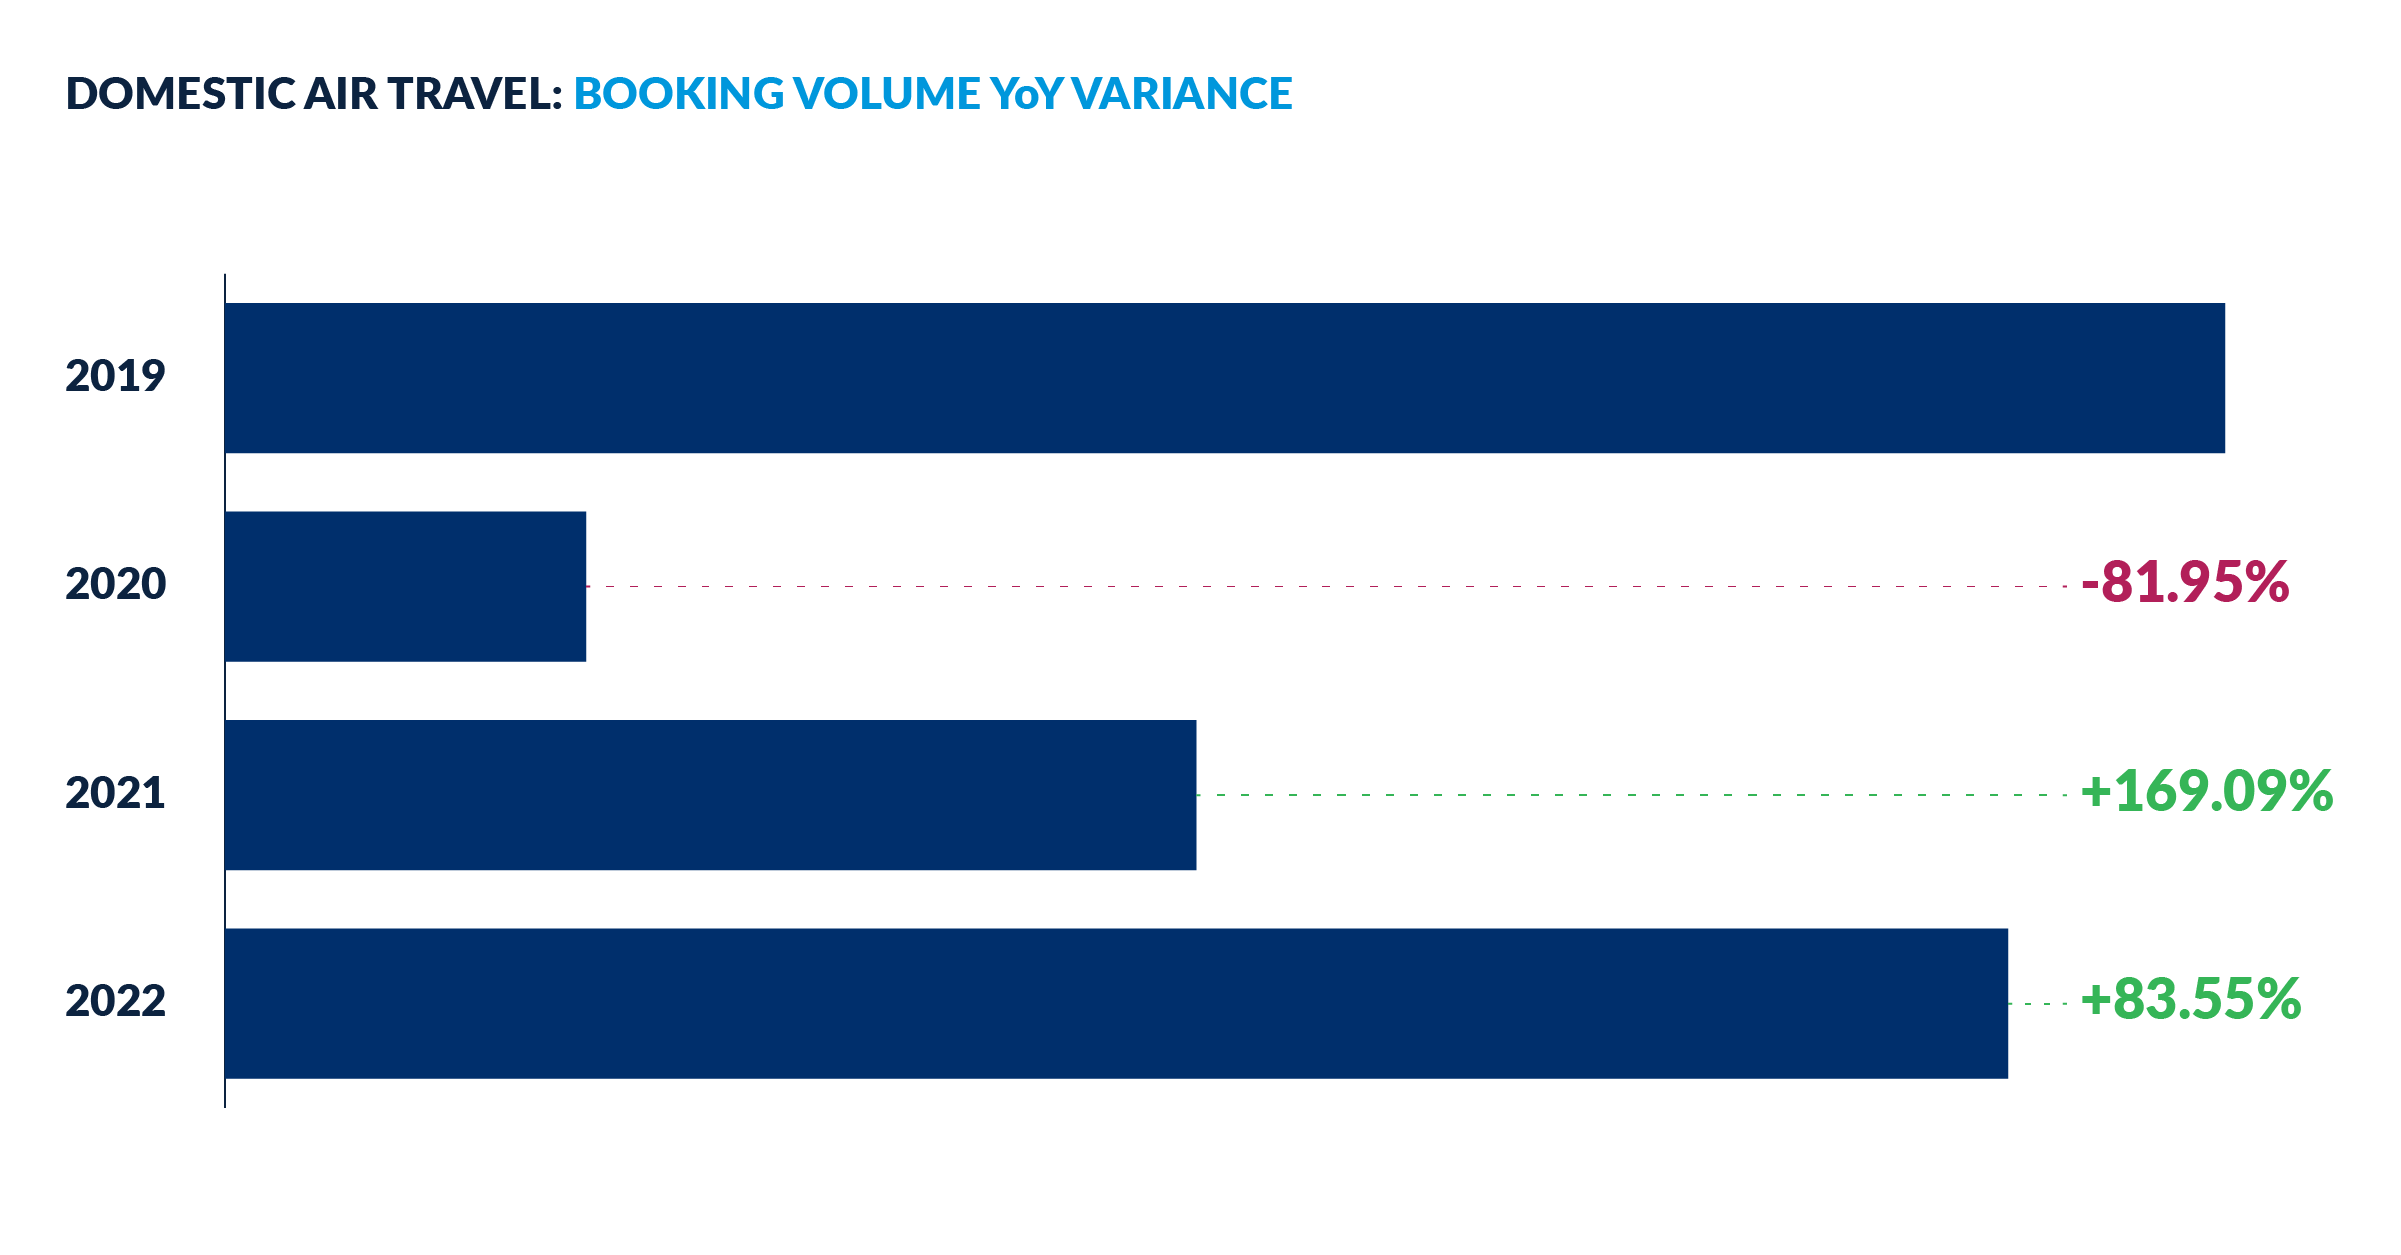 Domestic air travel booking volume